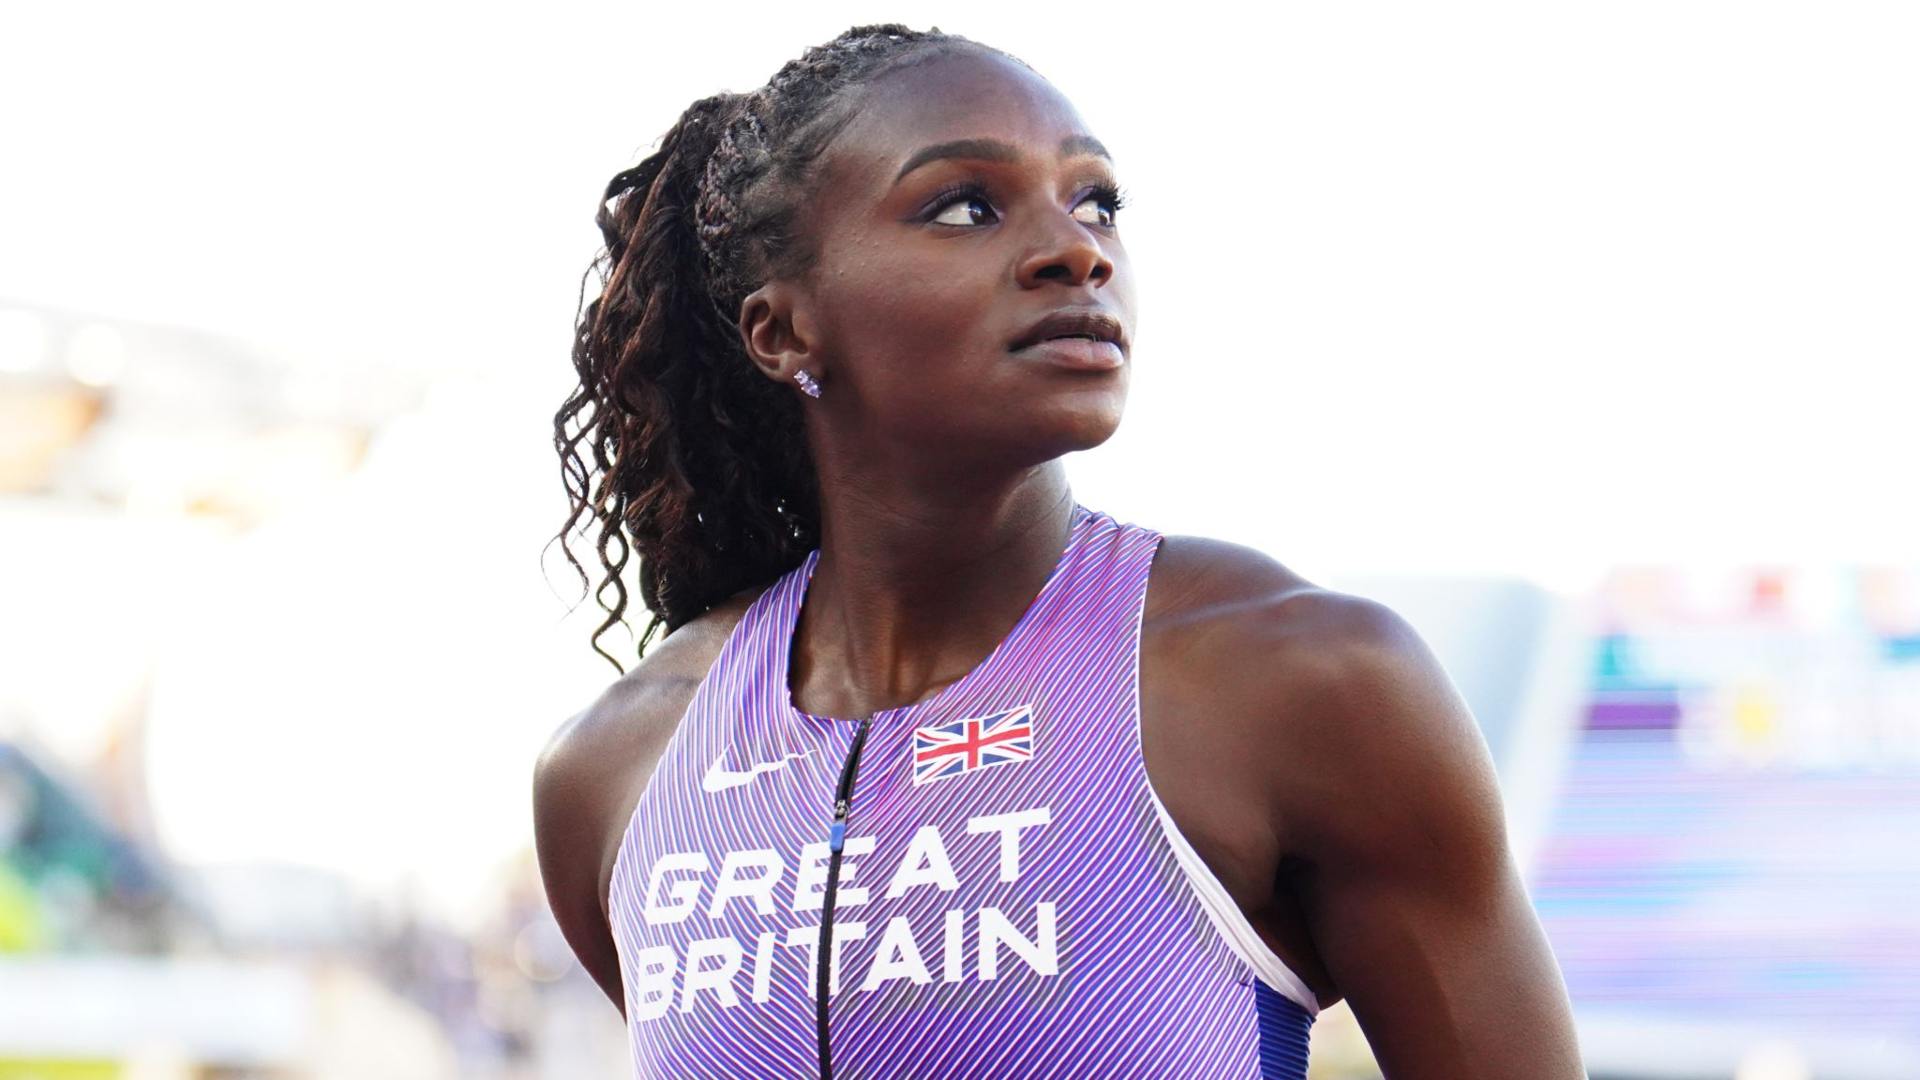 Dina Asher-Smith 1 in a file photo (Credits - Twitter)